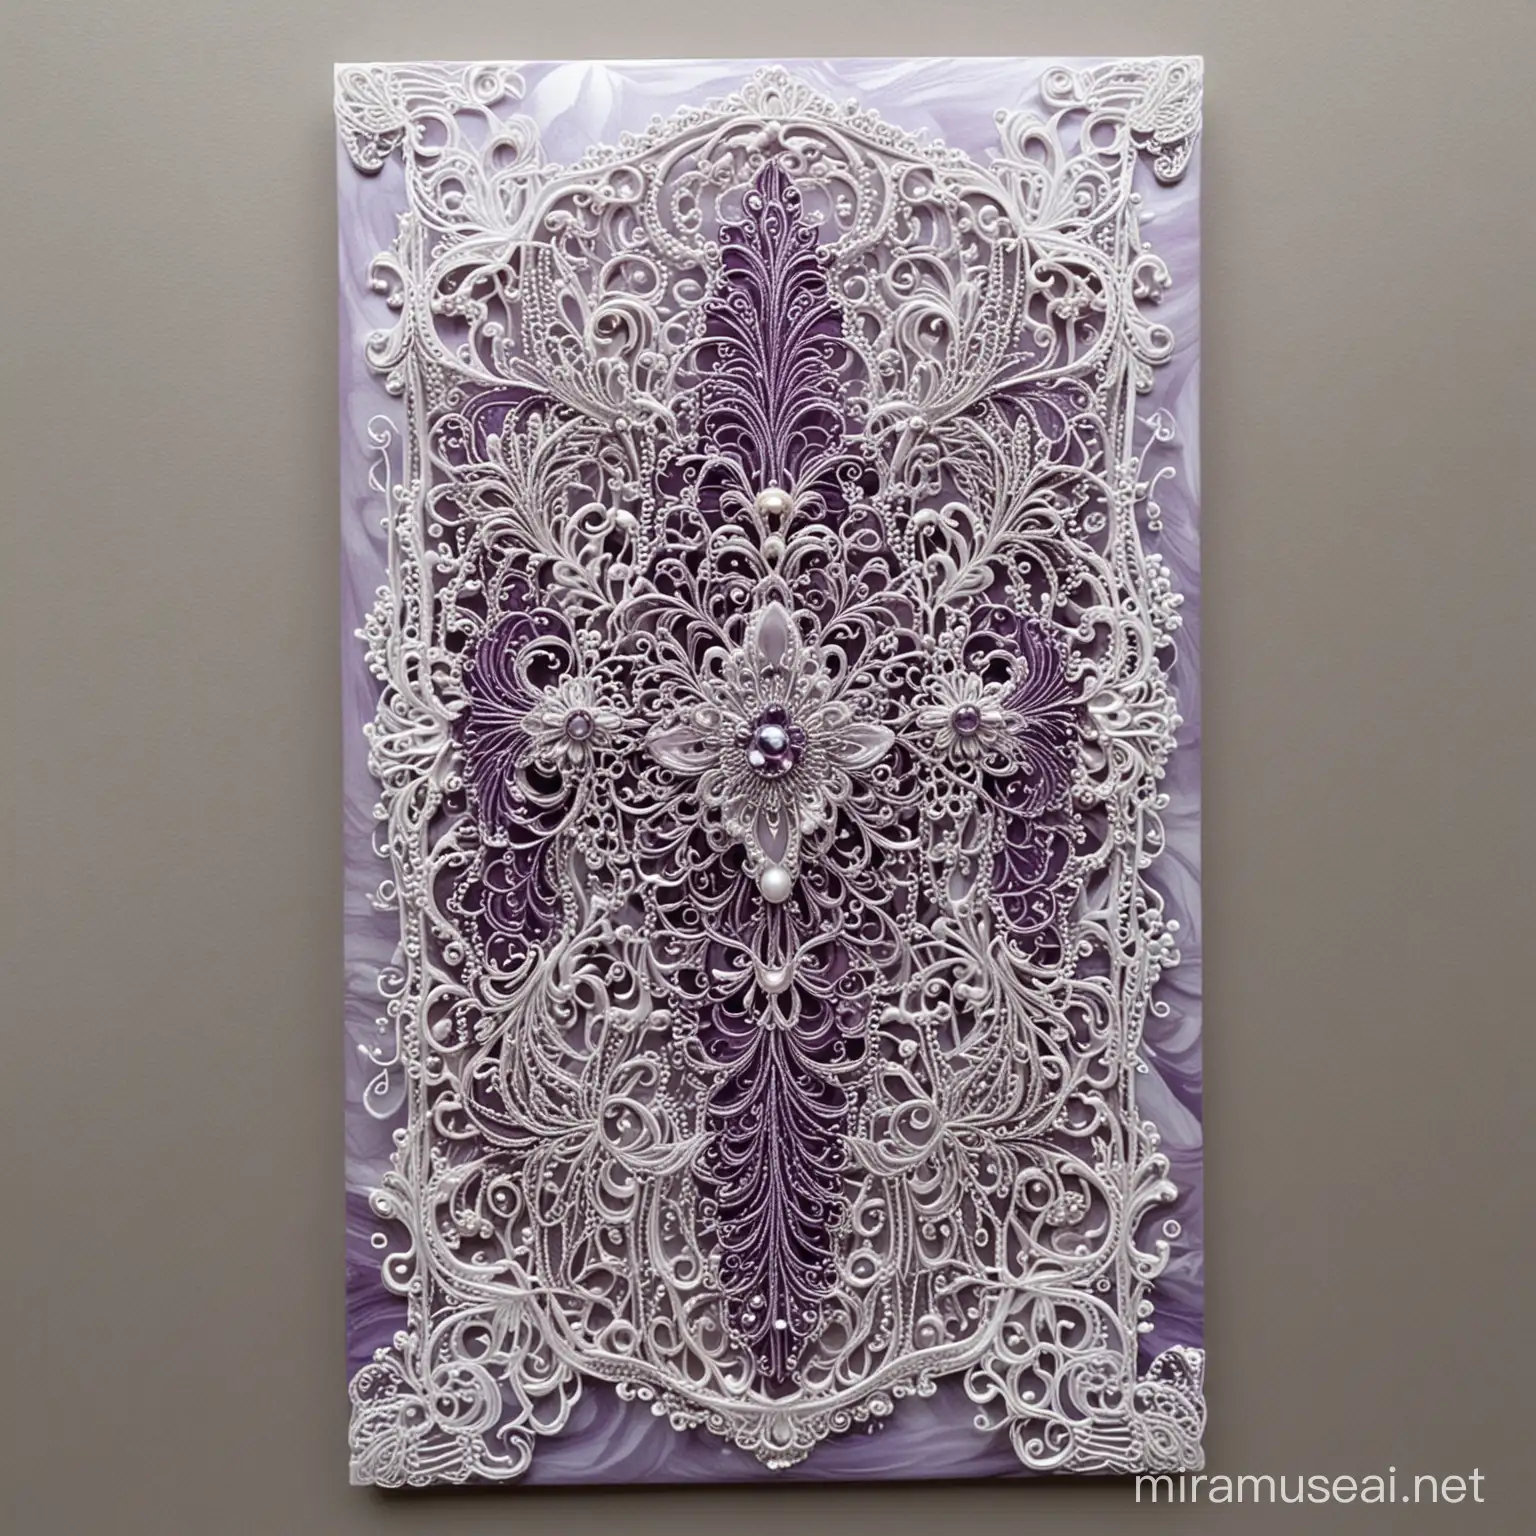 Elegant Purple Mother of Pearl Glitter Art with Filigree and Lace